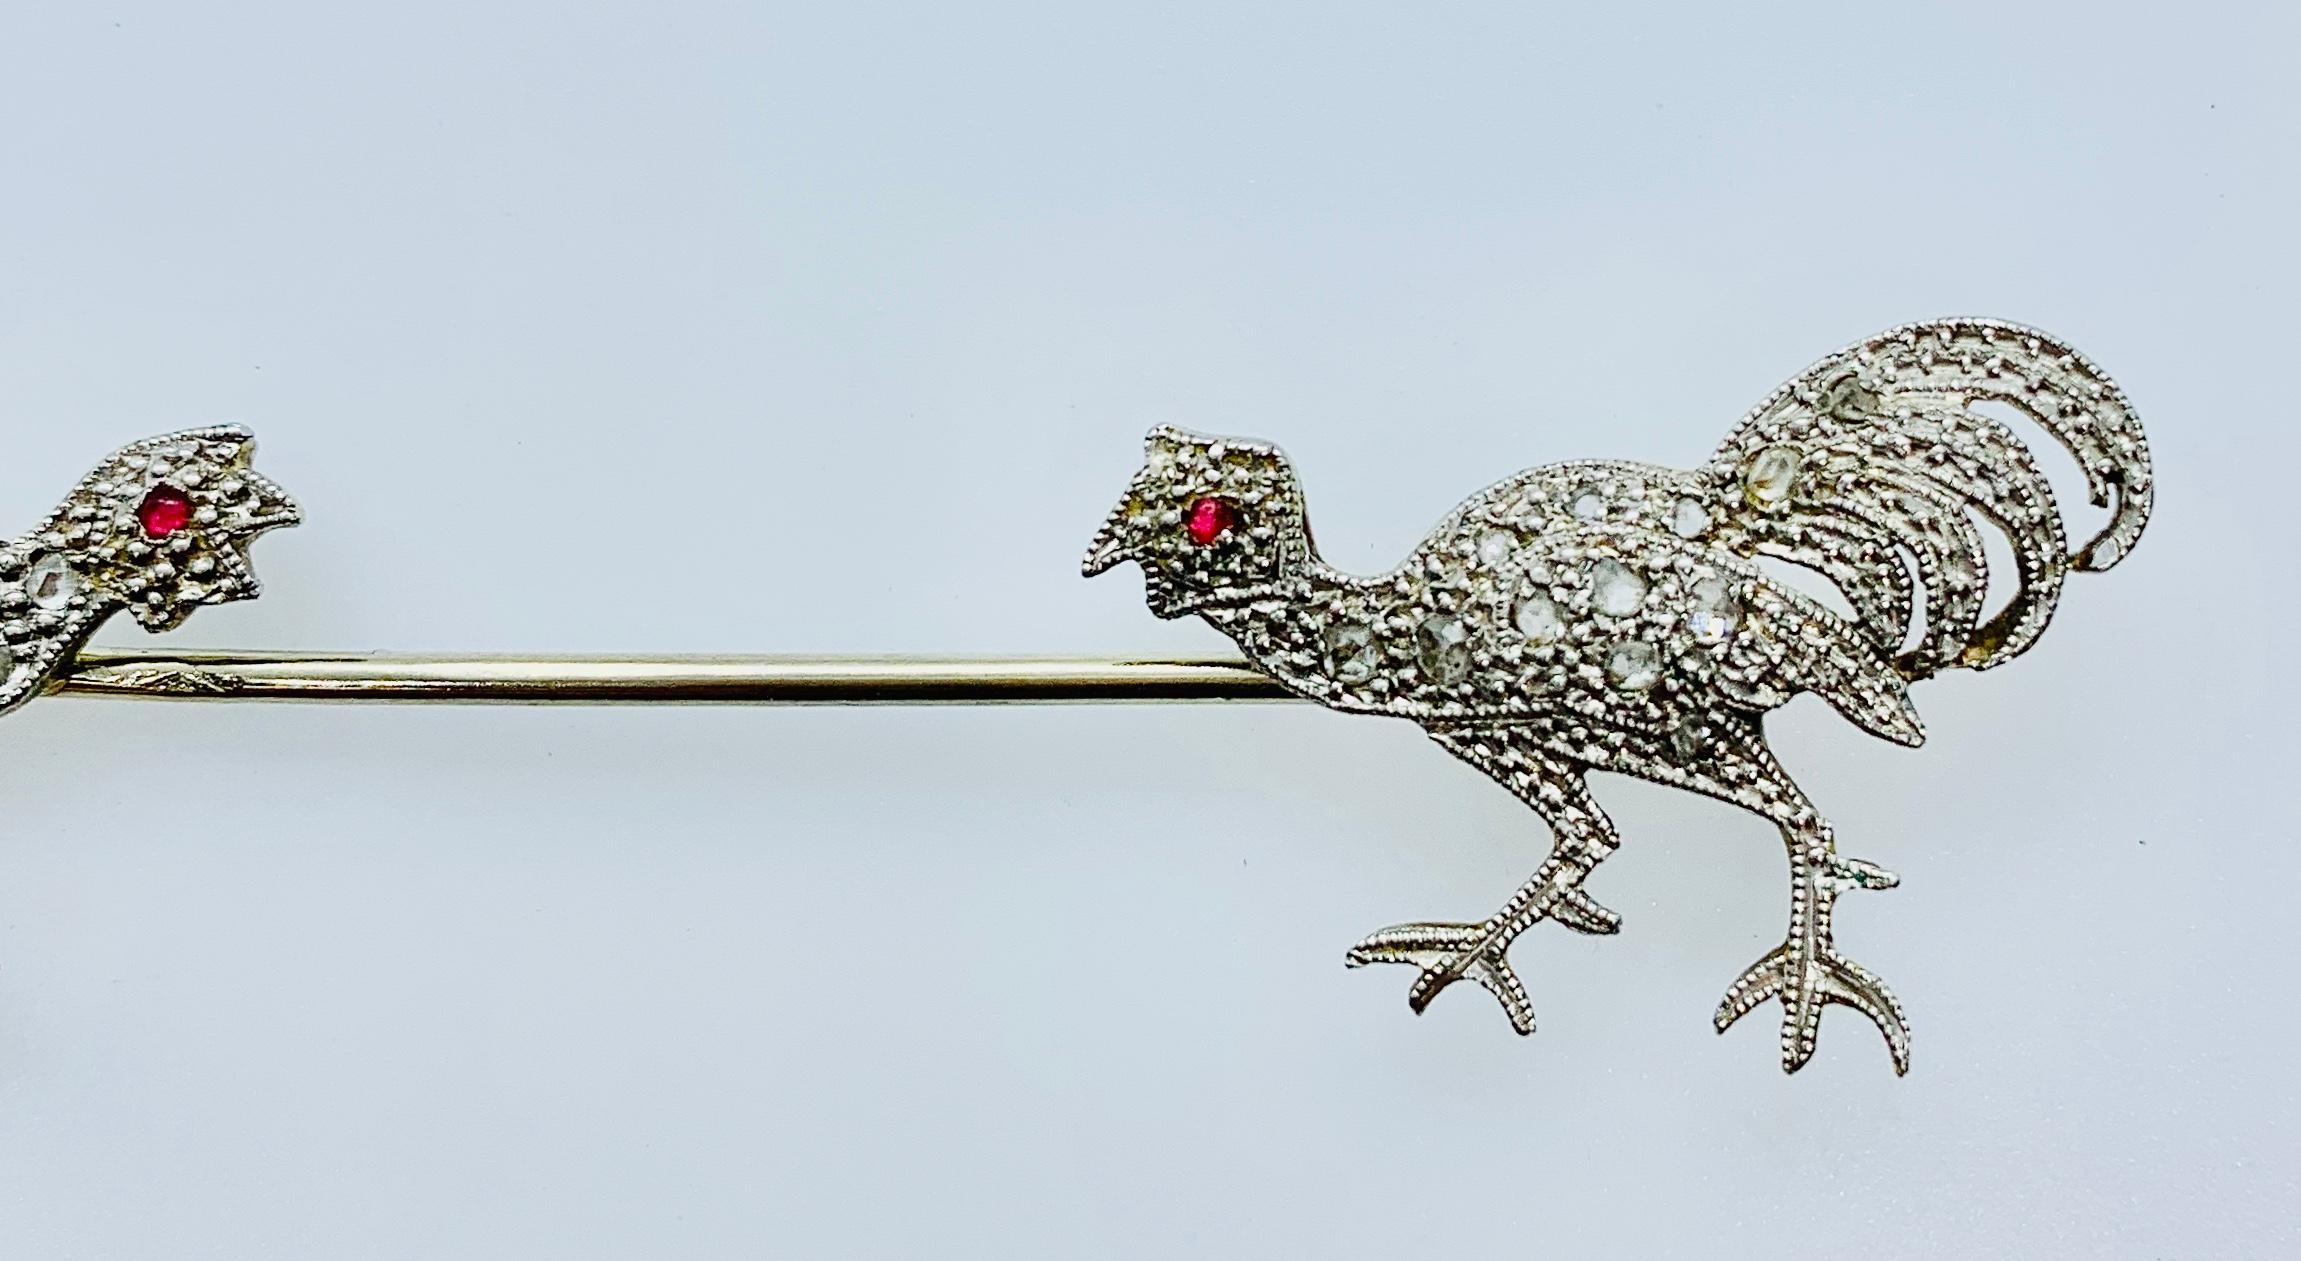 Gorgeous French Vintage Pin! This is a Jabot pin...a jabot pin is a brooch with a  bejeweled piece at each end designed so the fabric can be seen in between the ends. Jabot pins were initially used in the seventeenths century to secure the ruffled